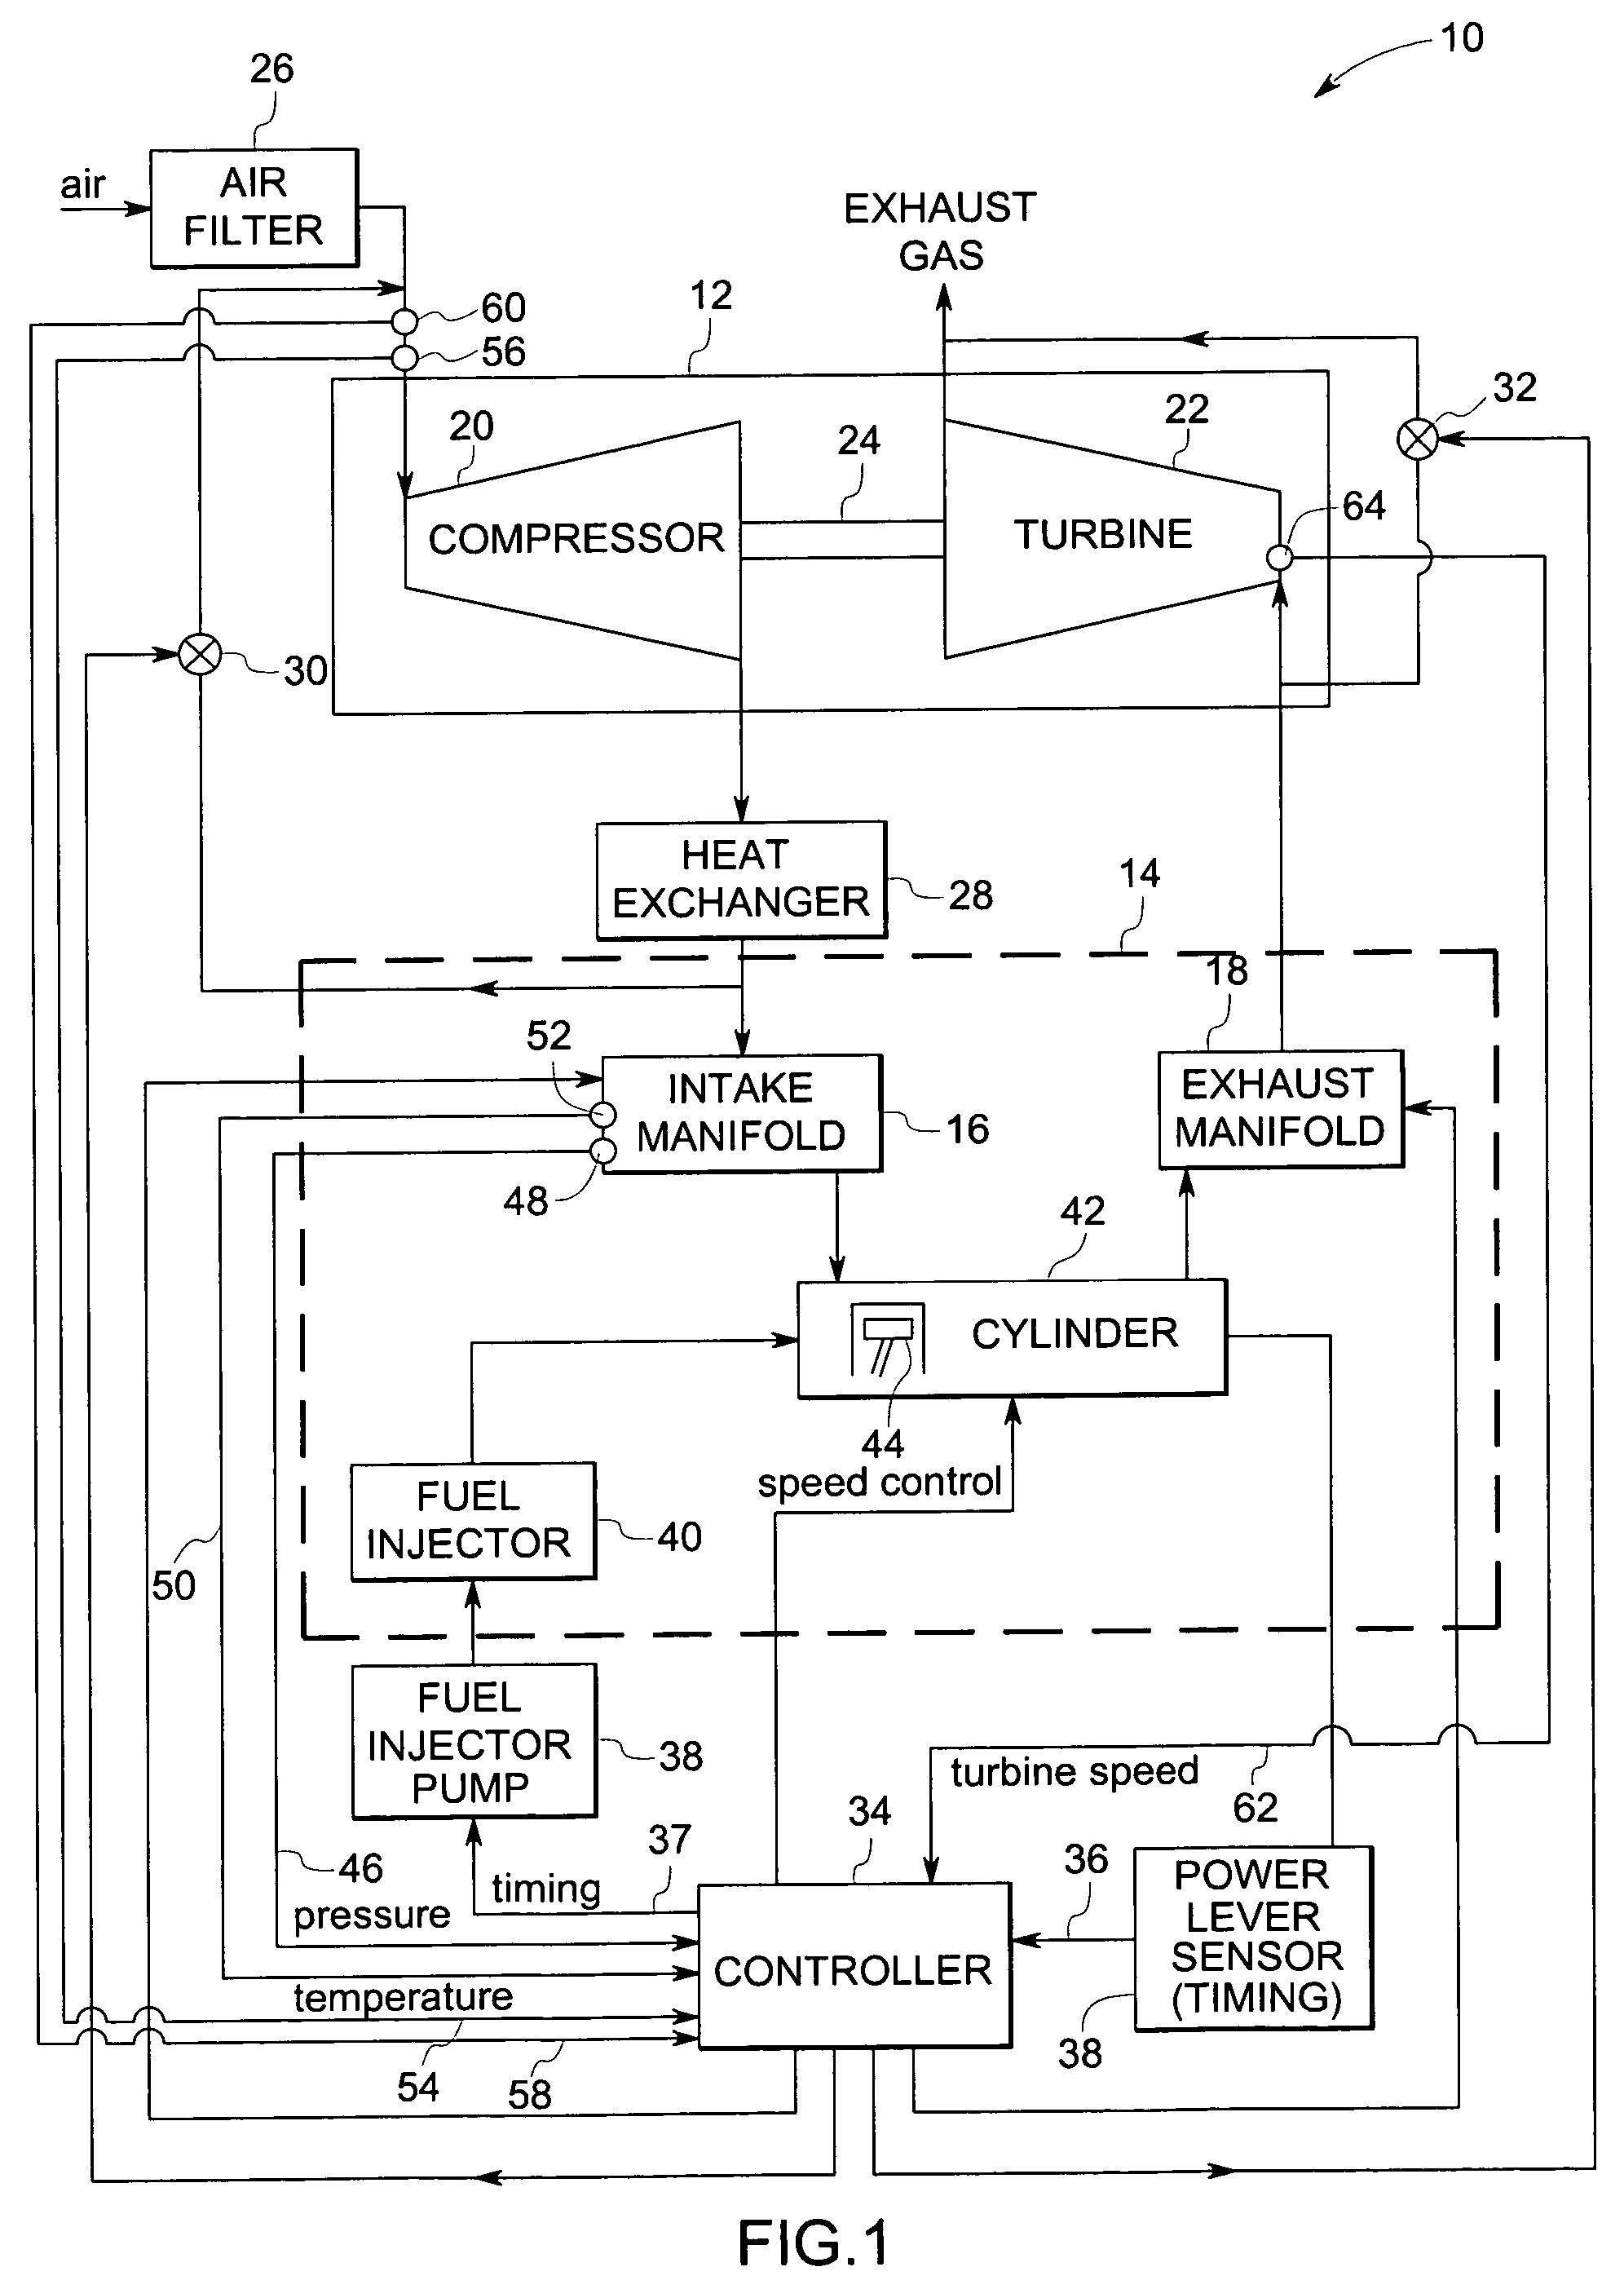 System and method for operating a turbocharged engine